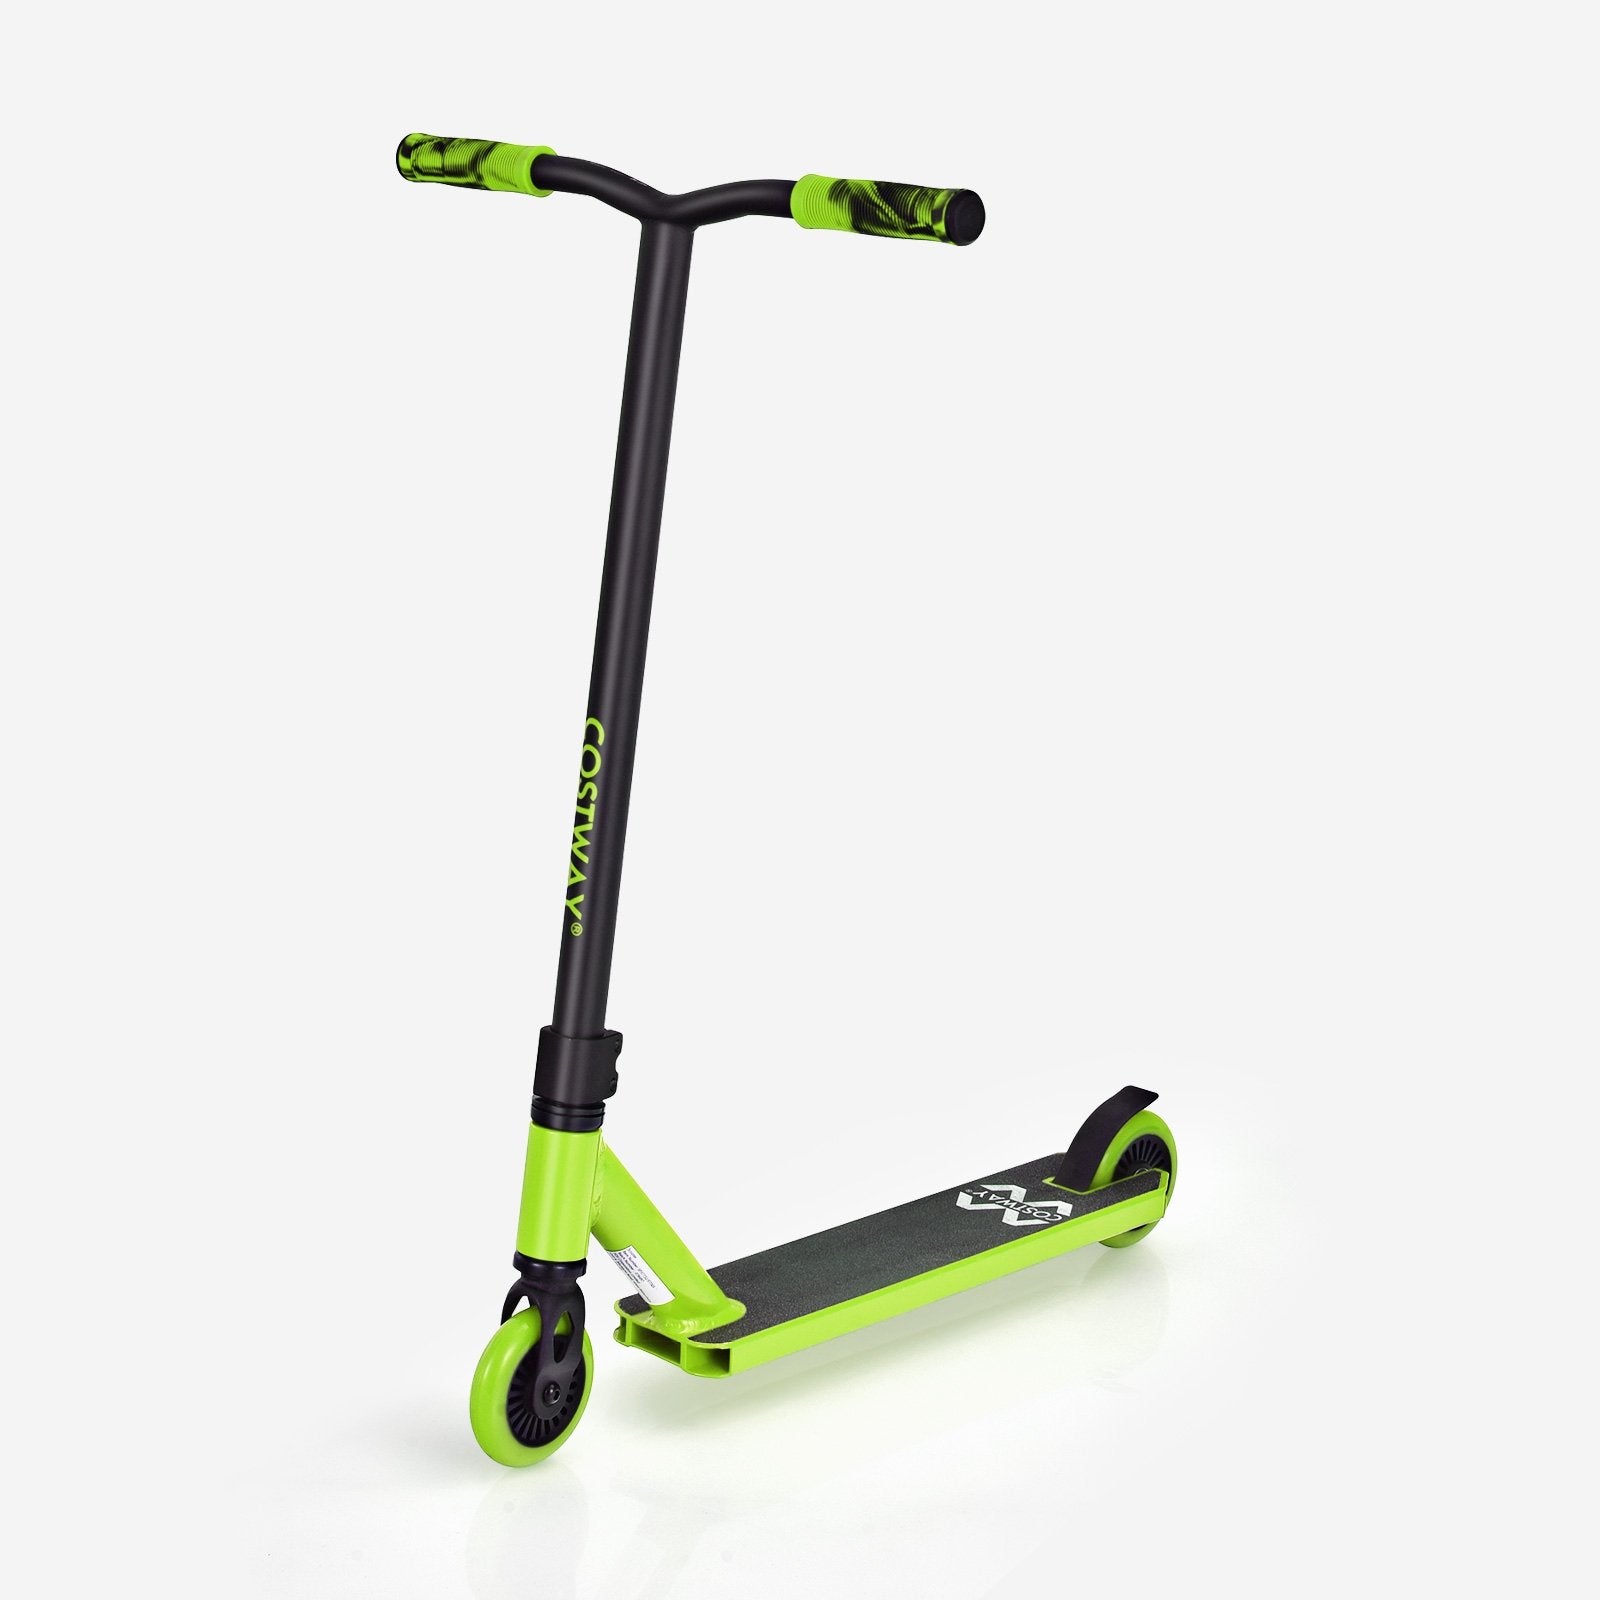 Boys Girls High-End Pro Stunt Scooter Trick Scooter with ABEC-9 Bearings, Green - Gallery Canada